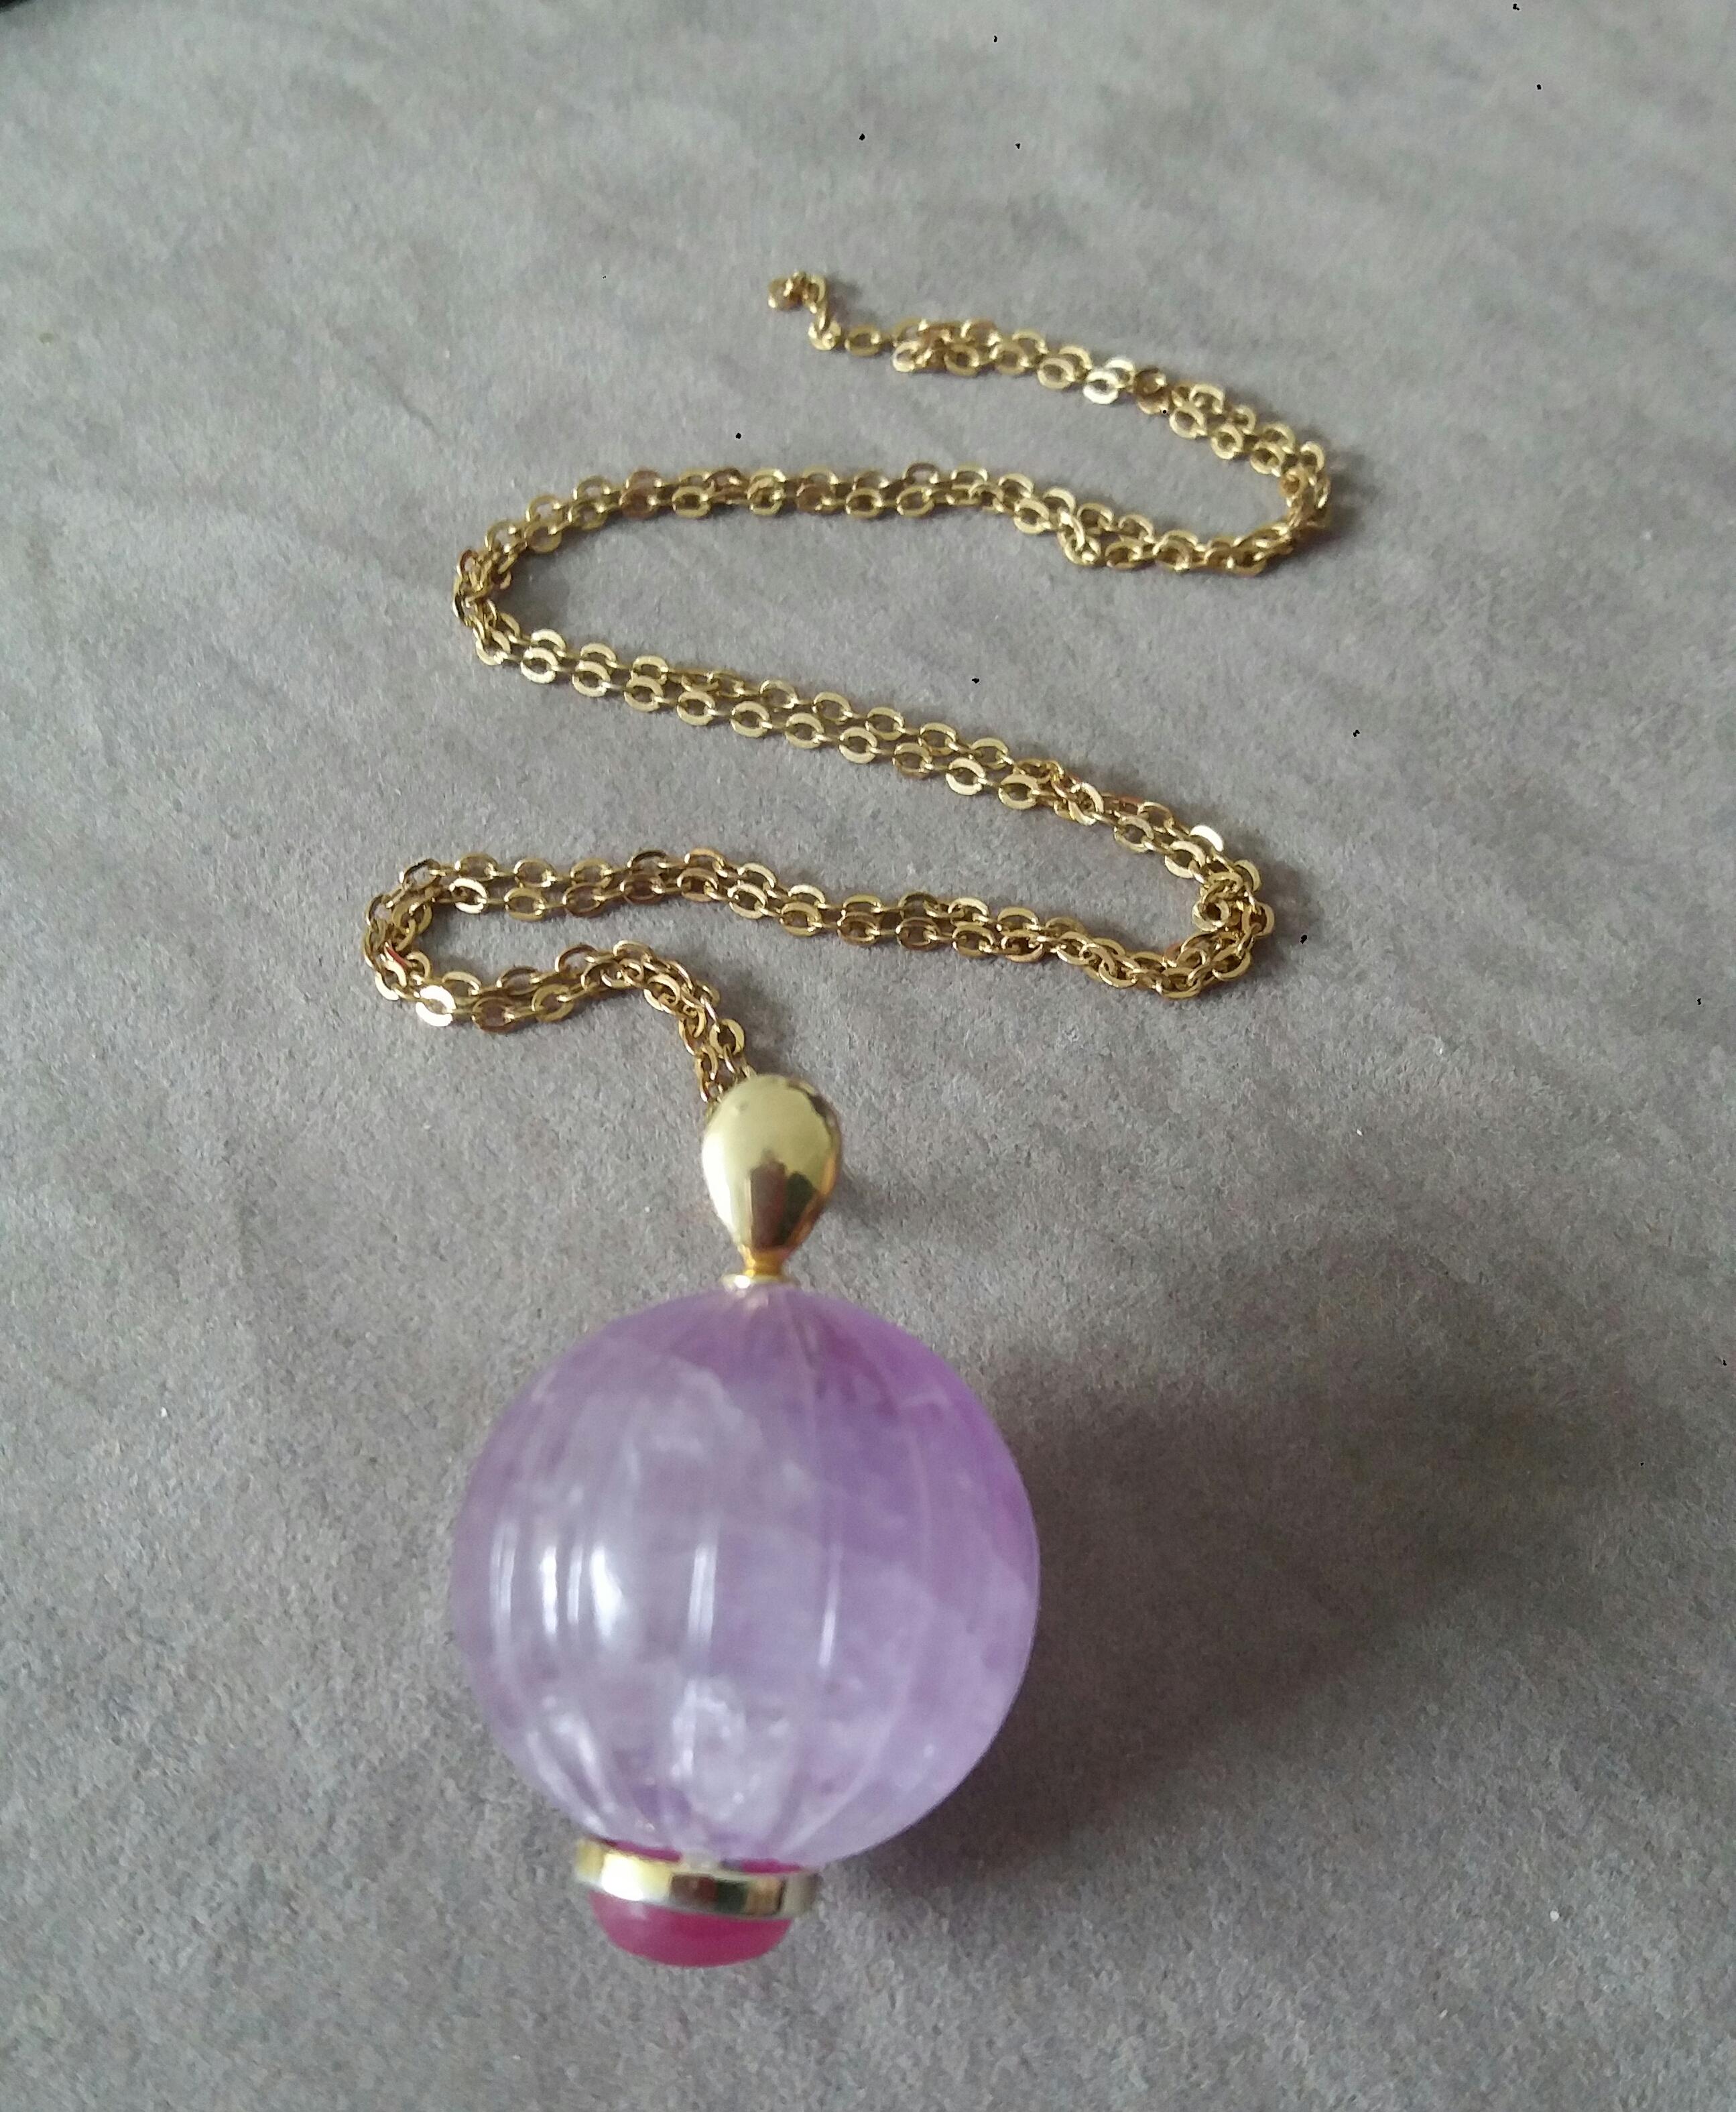 A unique pendant made of an Engraved Genuine Amethyst Round Bead 25 mm in diameter,set with an oval Ruby Cabochon measuring 8x10 mm. and a yellow gold pendant bail on the top part.

In 1978 our workshop started in Italy to make simple-chic Art Deco